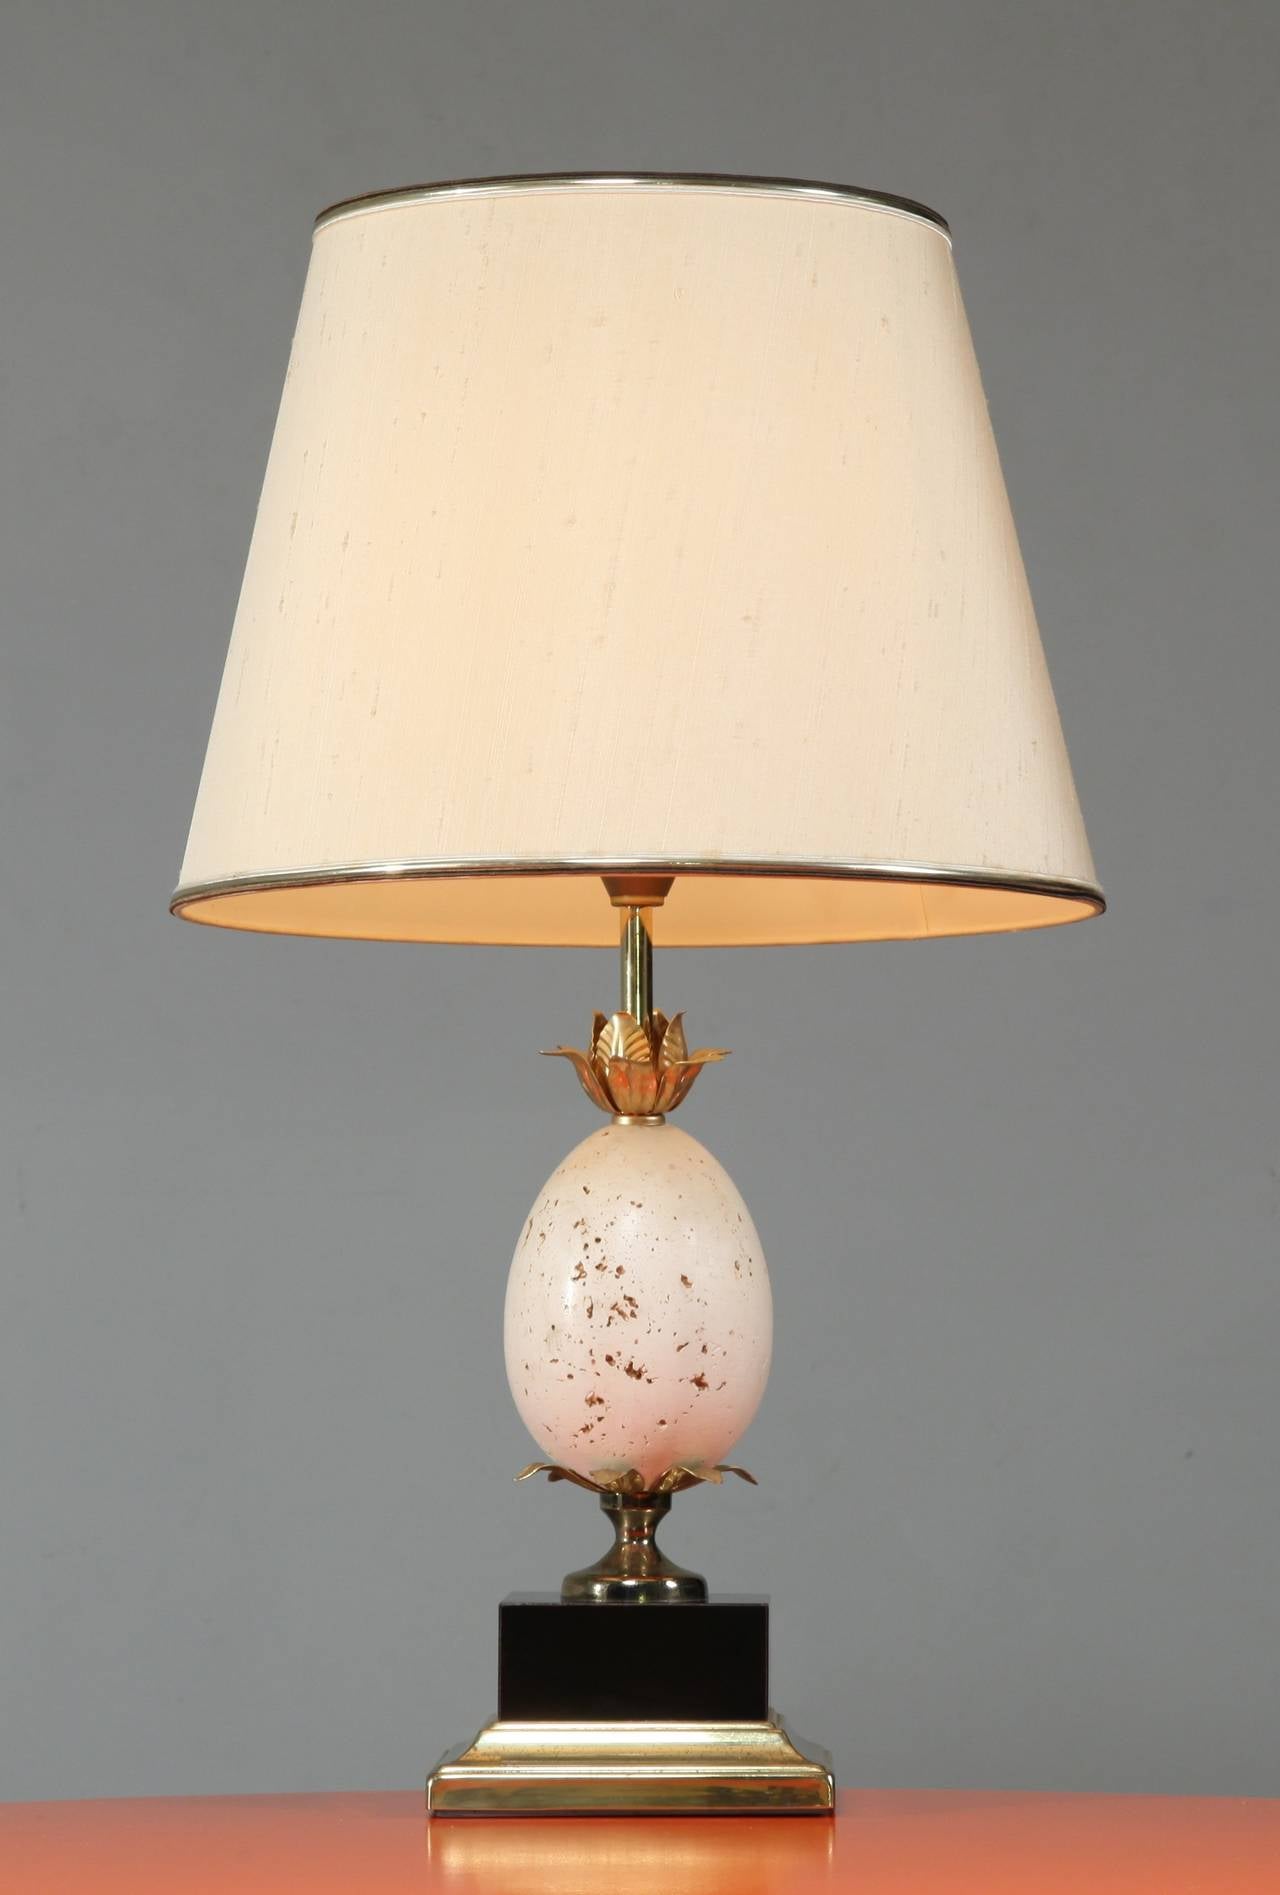 Set of table or console lamp in the manner of Maison Charles. 
Brass and marble base with travertine sotrich egg.
To be on the the safe side, the lamp should be checked locally by a specialist concerning local requirements.
